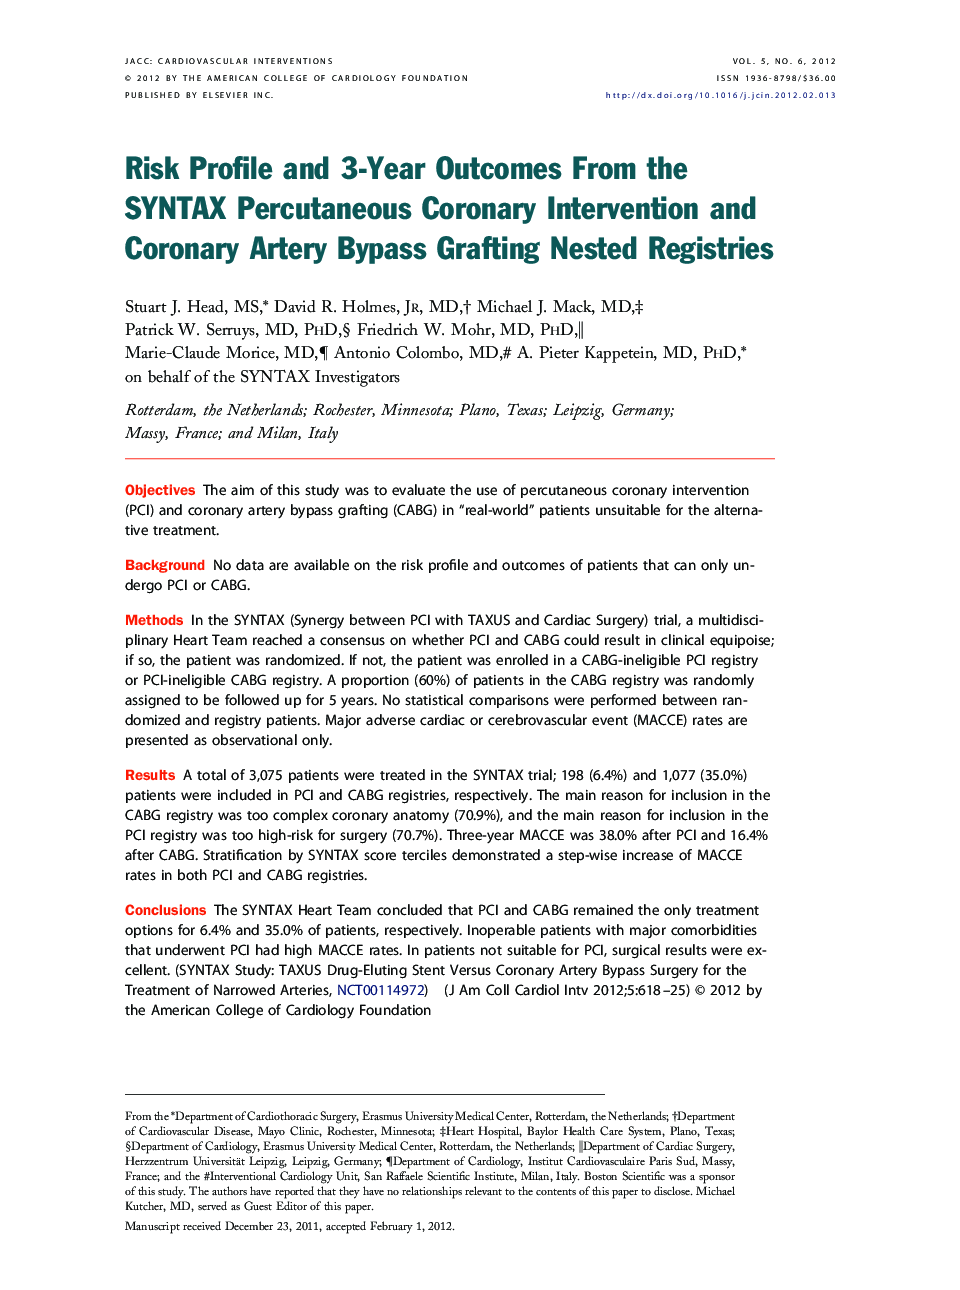 Risk Profile and 3-Year Outcomes From the SYNTAX Percutaneous Coronary Intervention and Coronary Artery Bypass Grafting Nested Registries 